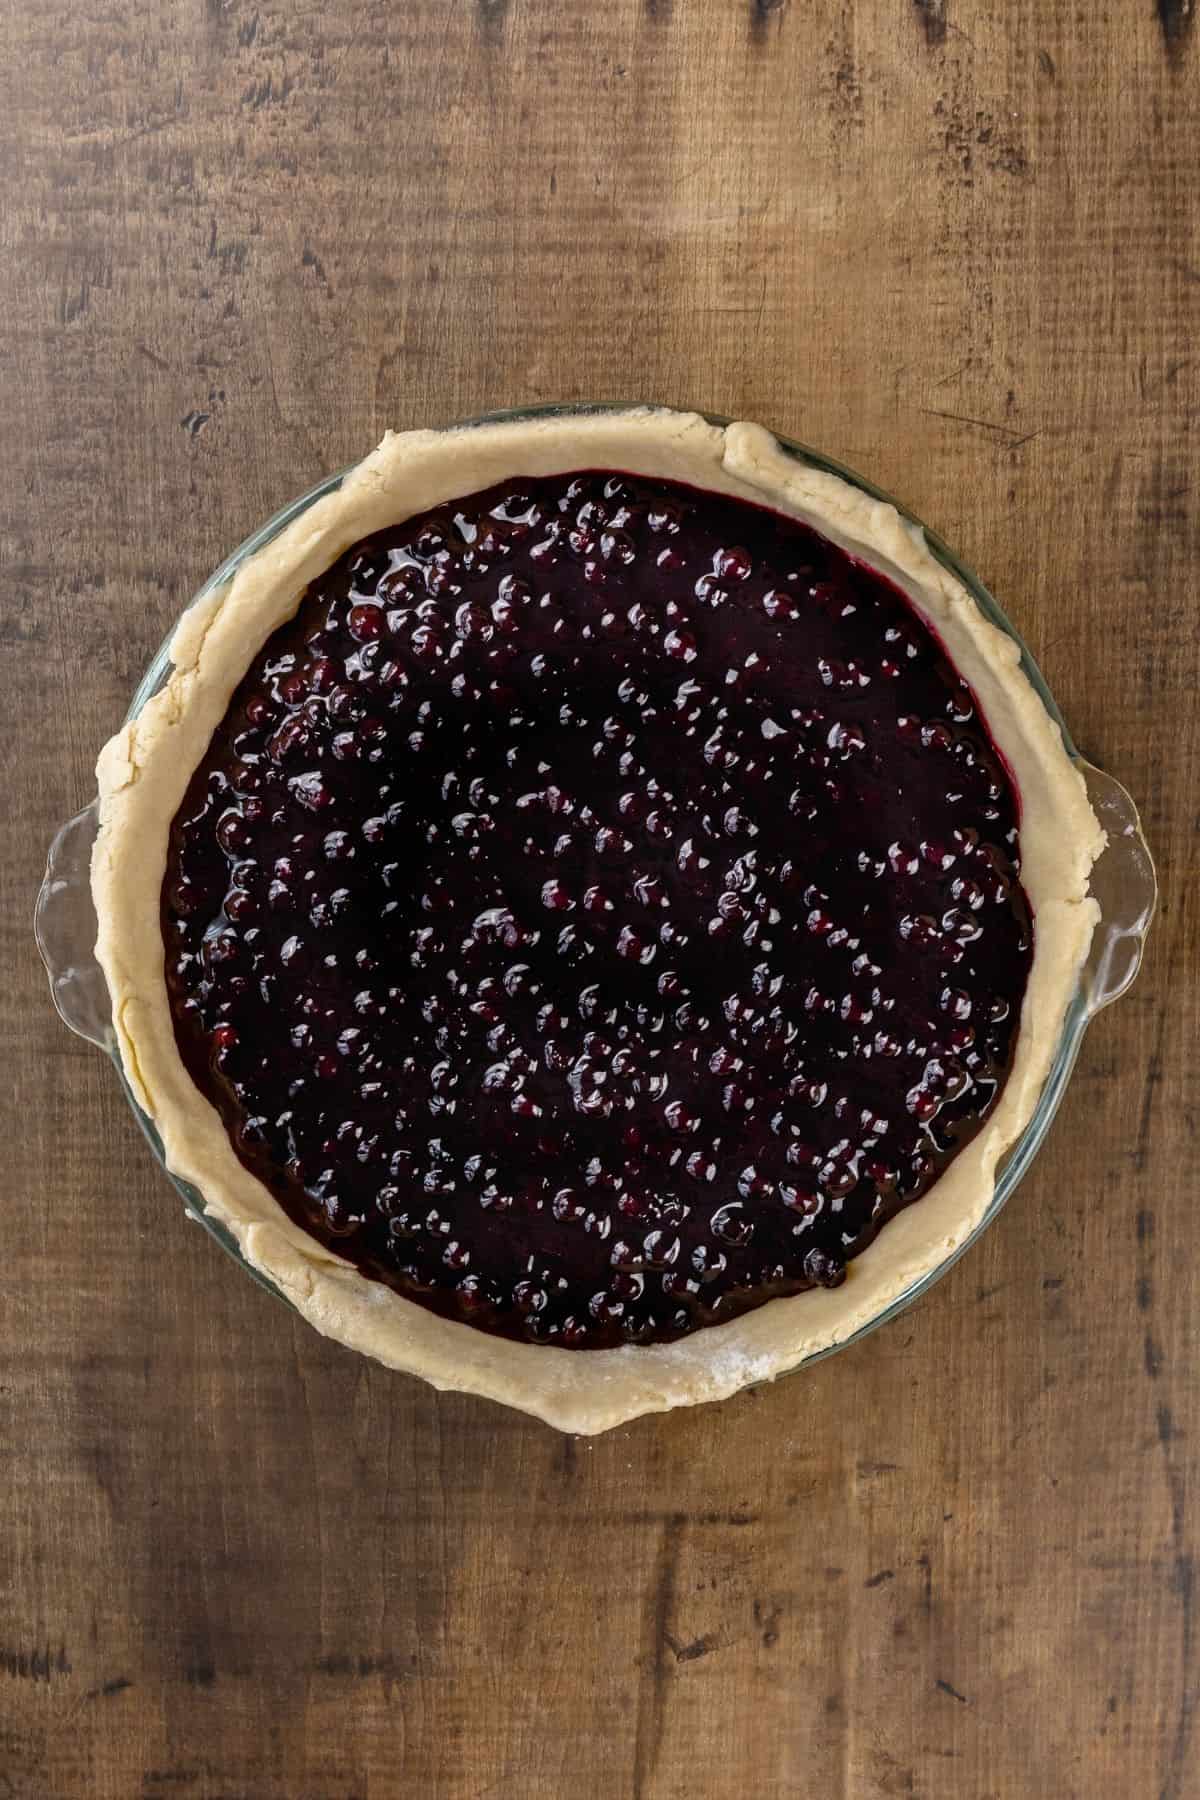 An unbaked blueberry pie with the finished filling in a glass pan on a wood table.